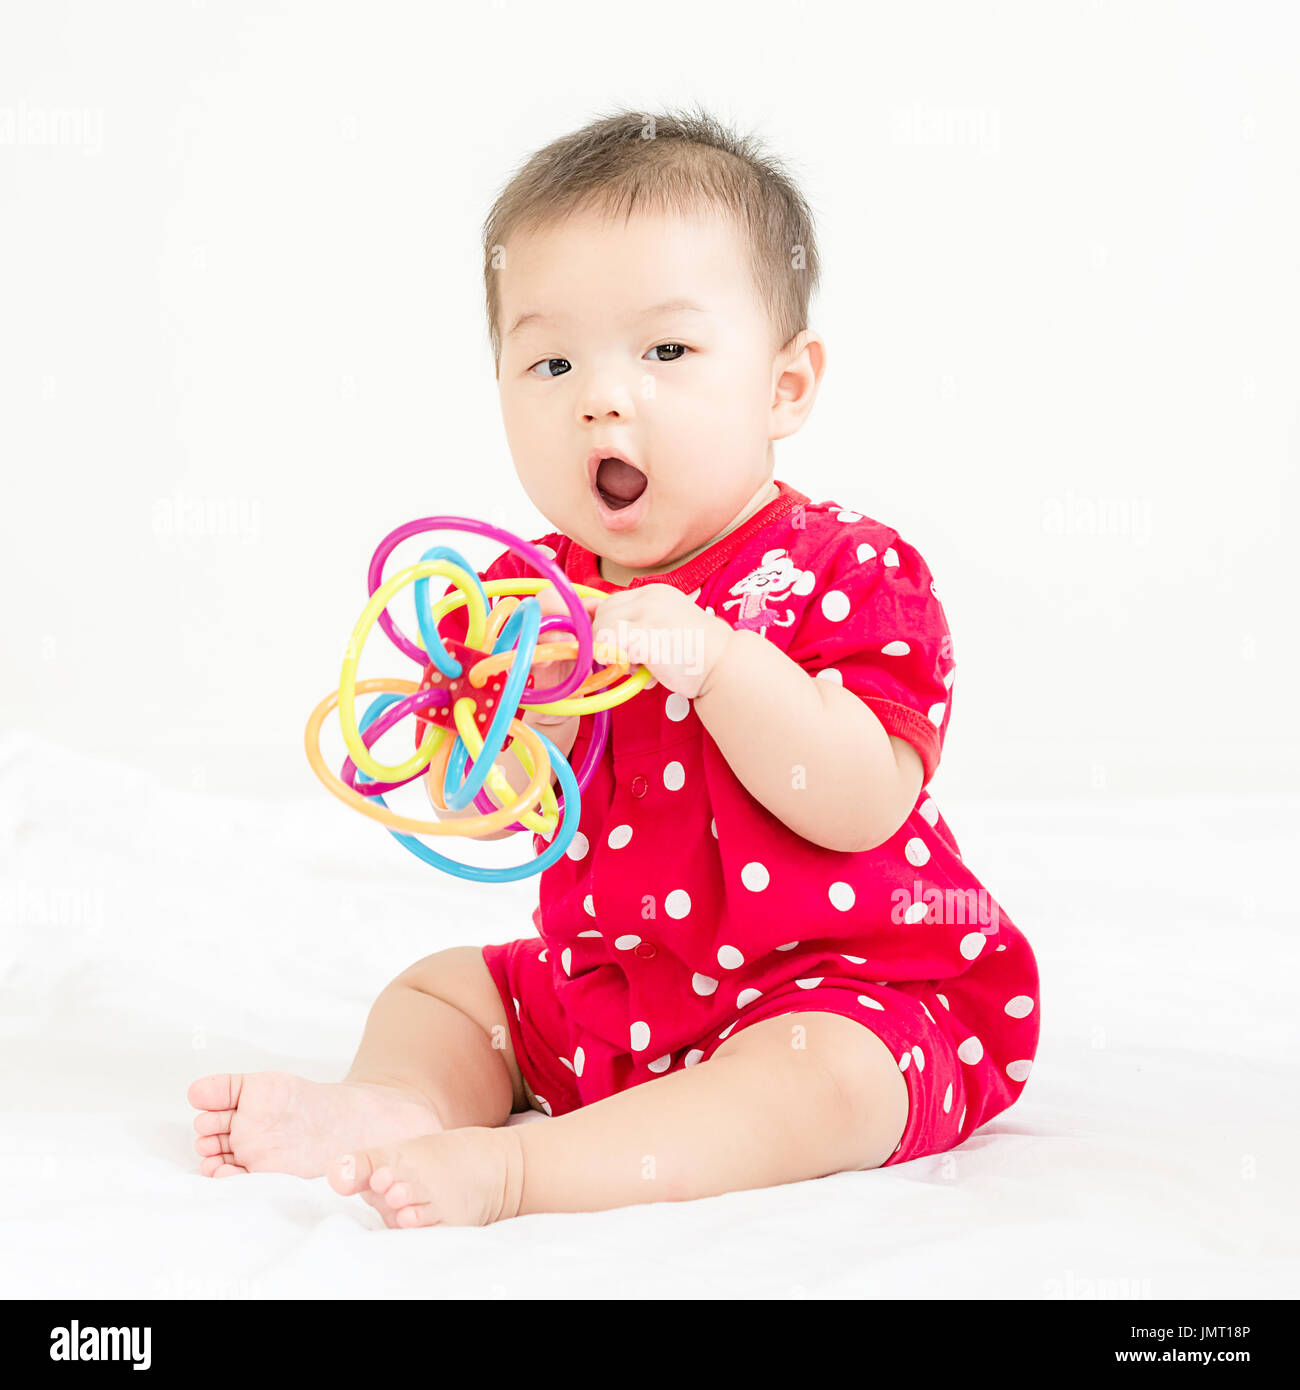 Portrait of a little adorable infant baby girl sitting on the bed and smiling to camera with bites toy Stock Photo